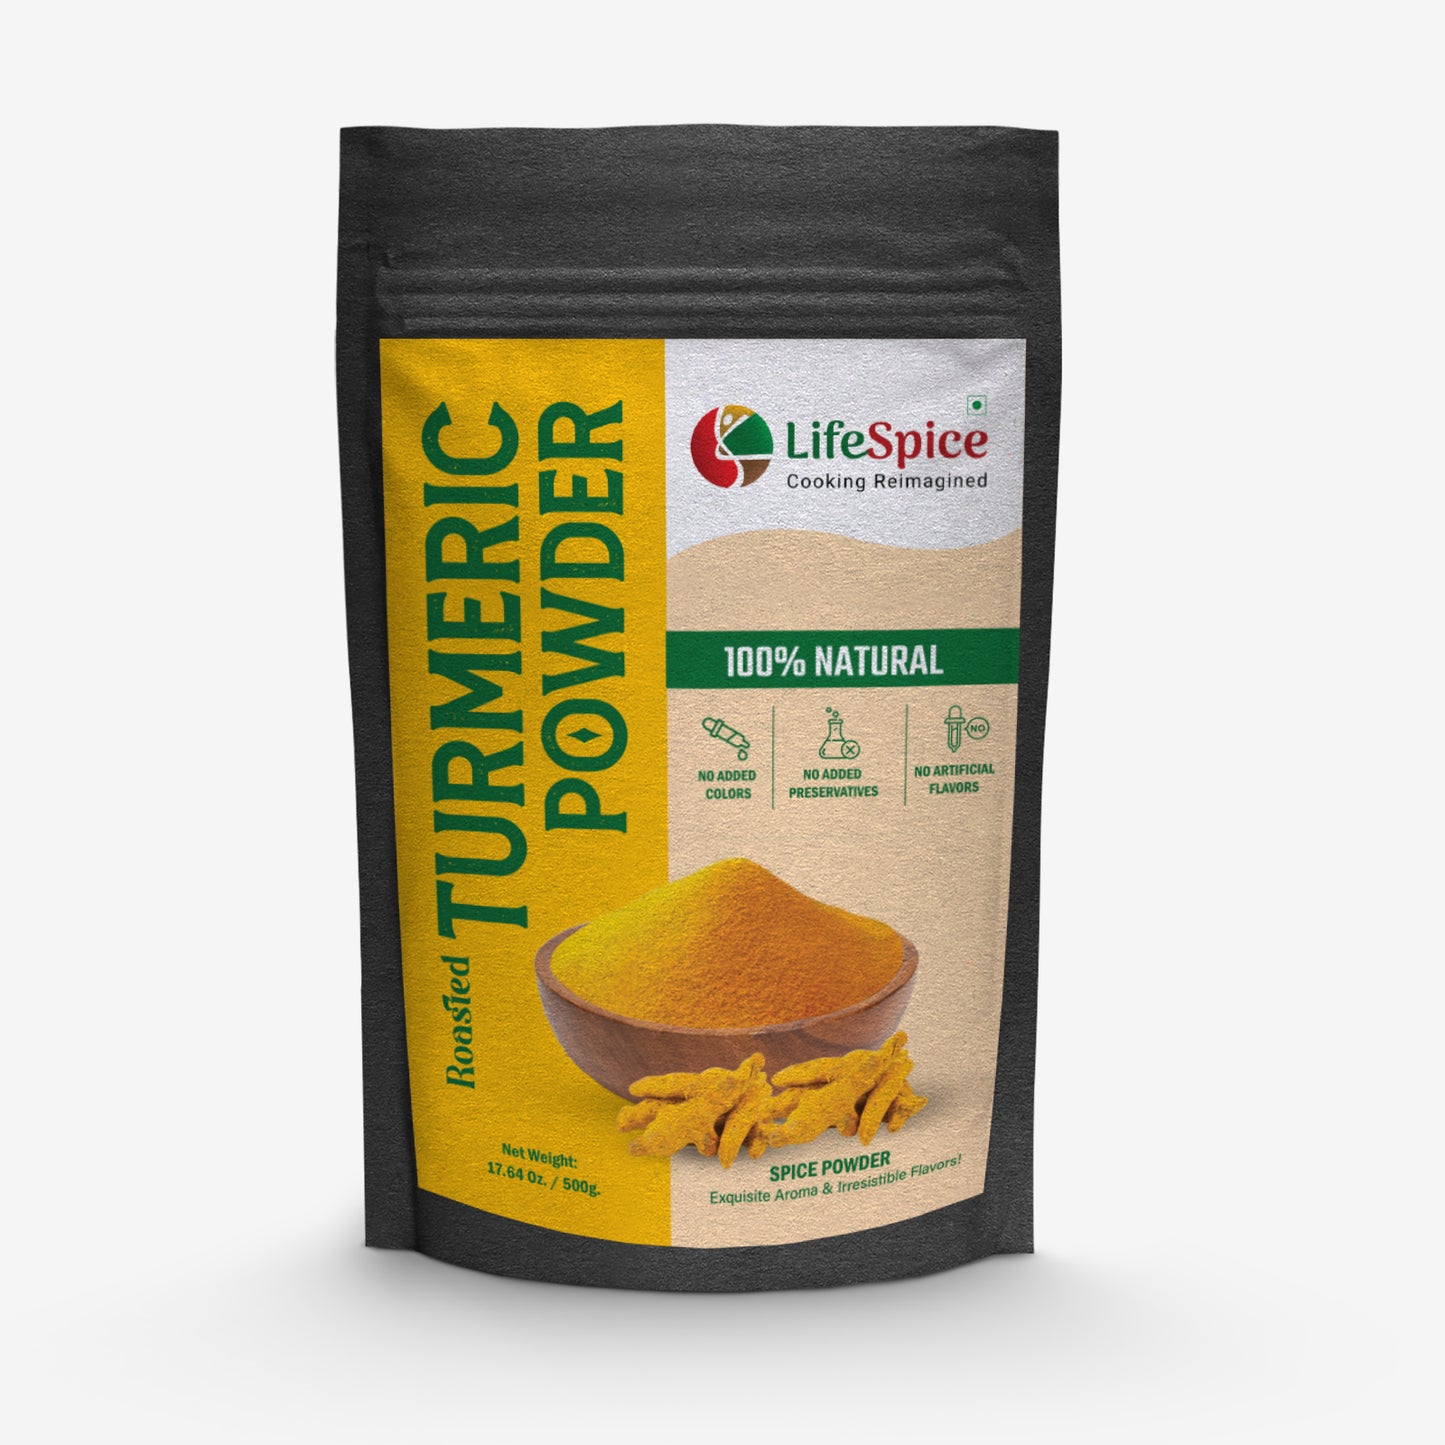 Lifespice Roasted Turmeric Powder - 500g pouch